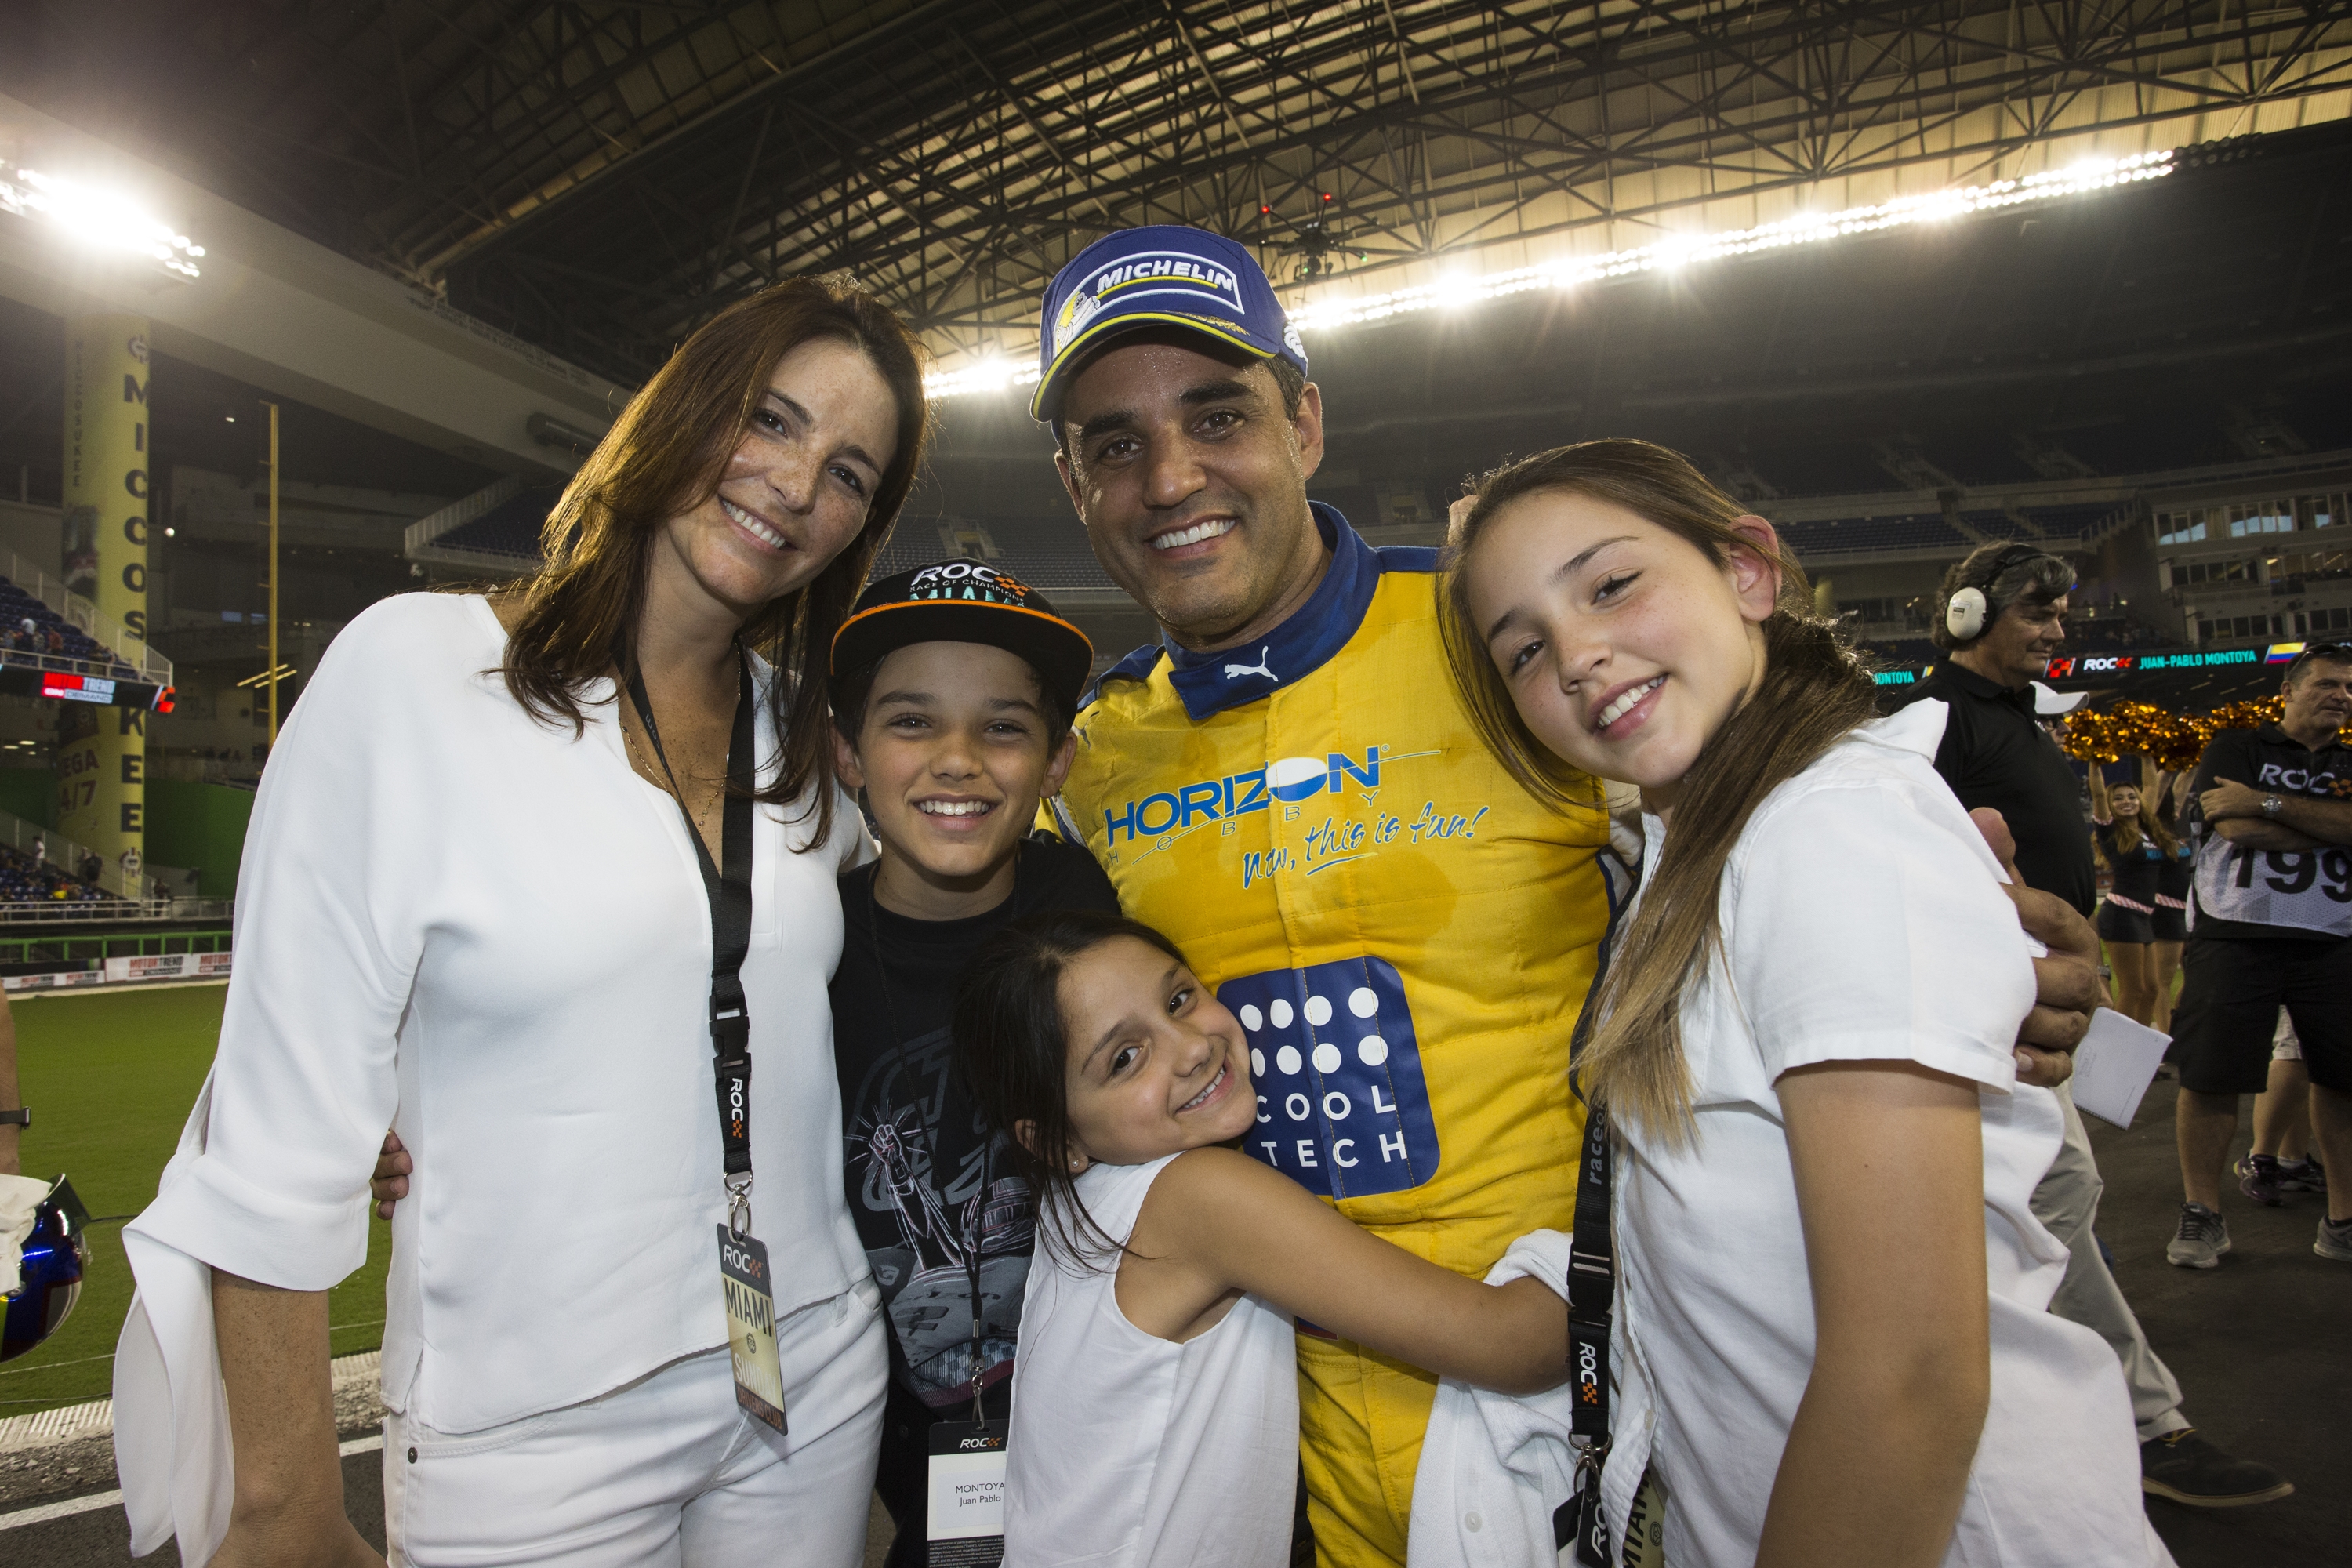 champion_of_champions_juan-pablo_montoya_col_celebrates_his_win_with_his_family_during_the_race_of_champions_on_saturday_21_january_2017_at_marlins_park_miami_florida_usa_519.JPG